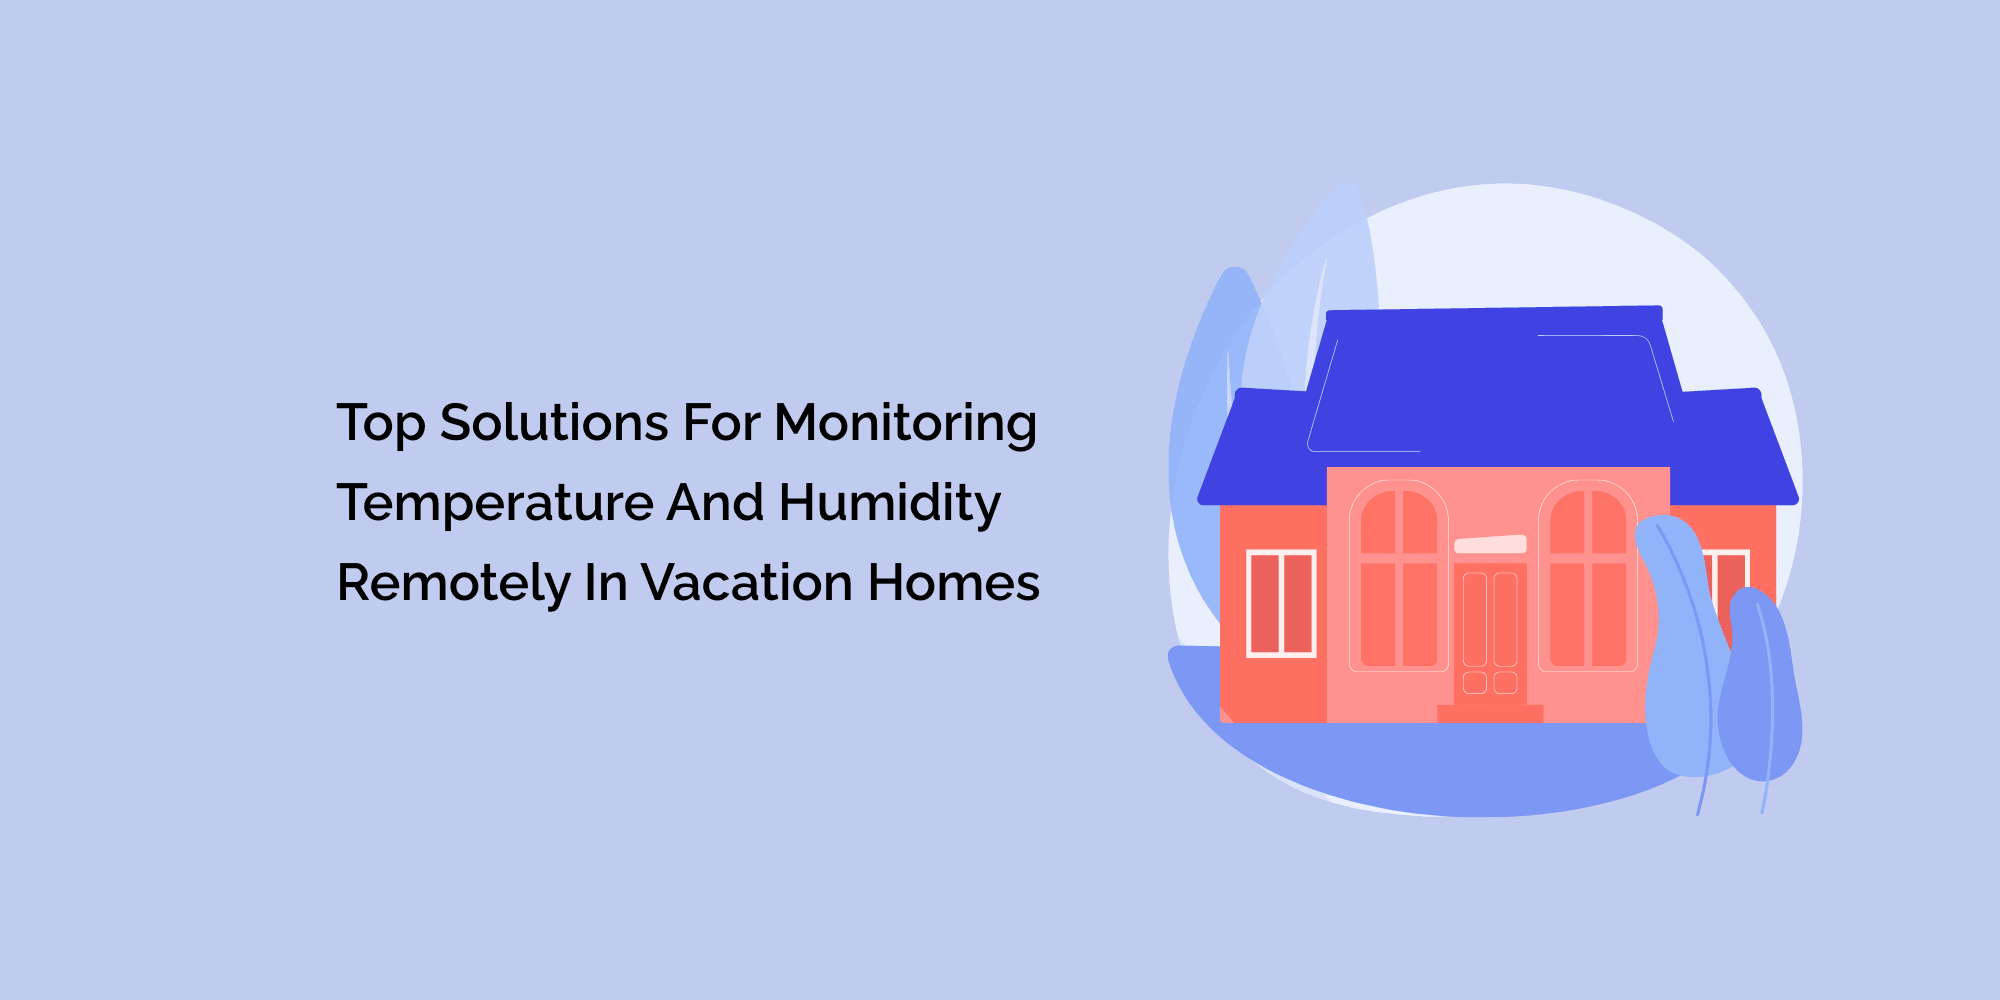 Top Solutions for Monitoring Temperature and Humidity Remotely in Vacation Homes